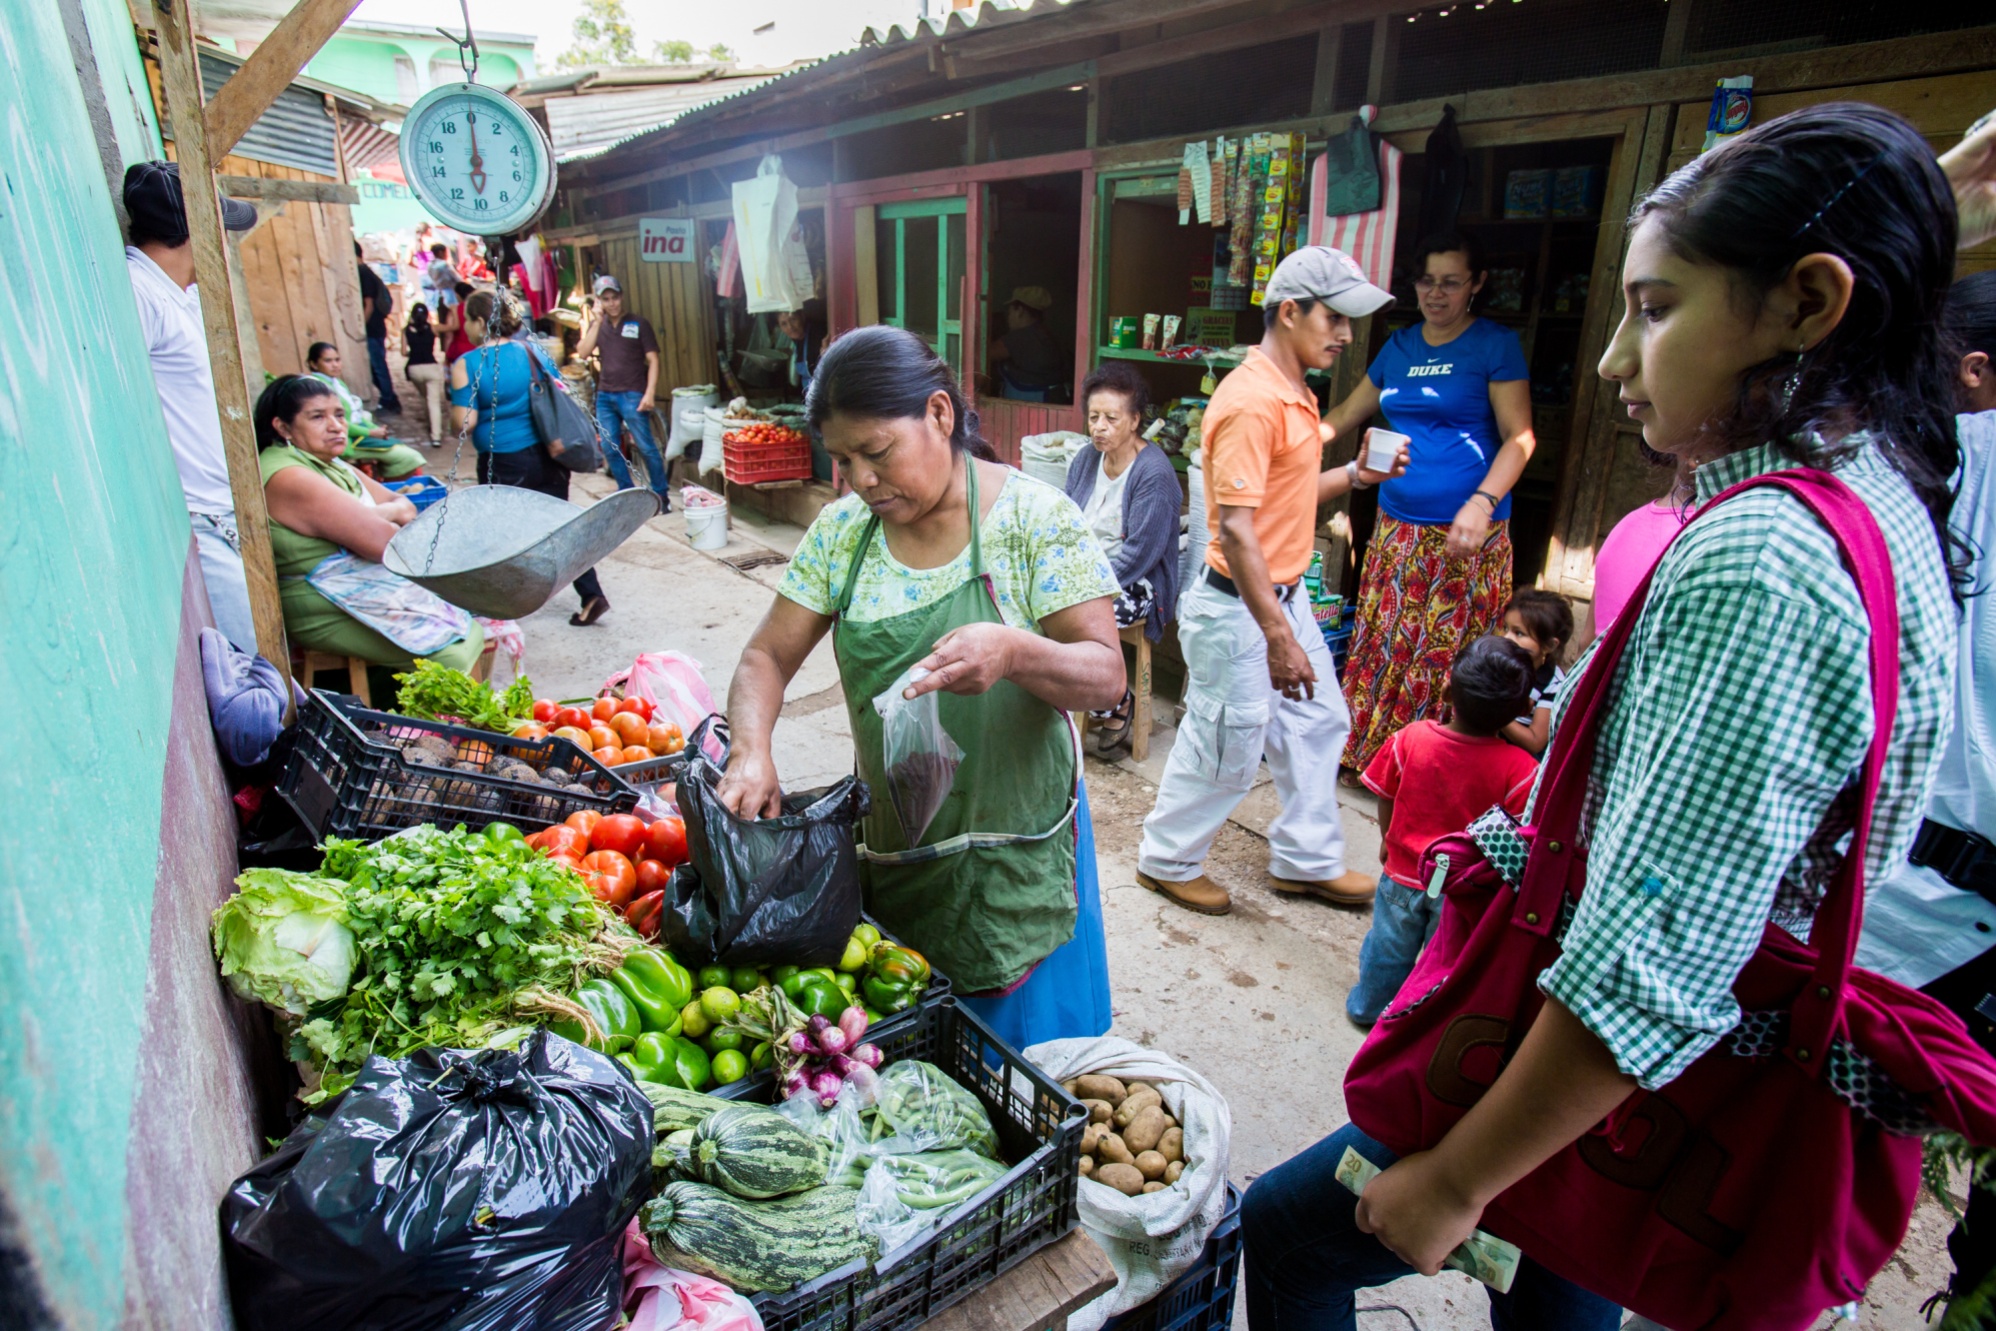 Adelante Foundation microcredit client Dona Ninfa (center) sells vegetables at the market in La Esperanza, Honduras. The Adelante Foundation's microcredit program, which offers women loans and business training aimed at increasing their household incomes.